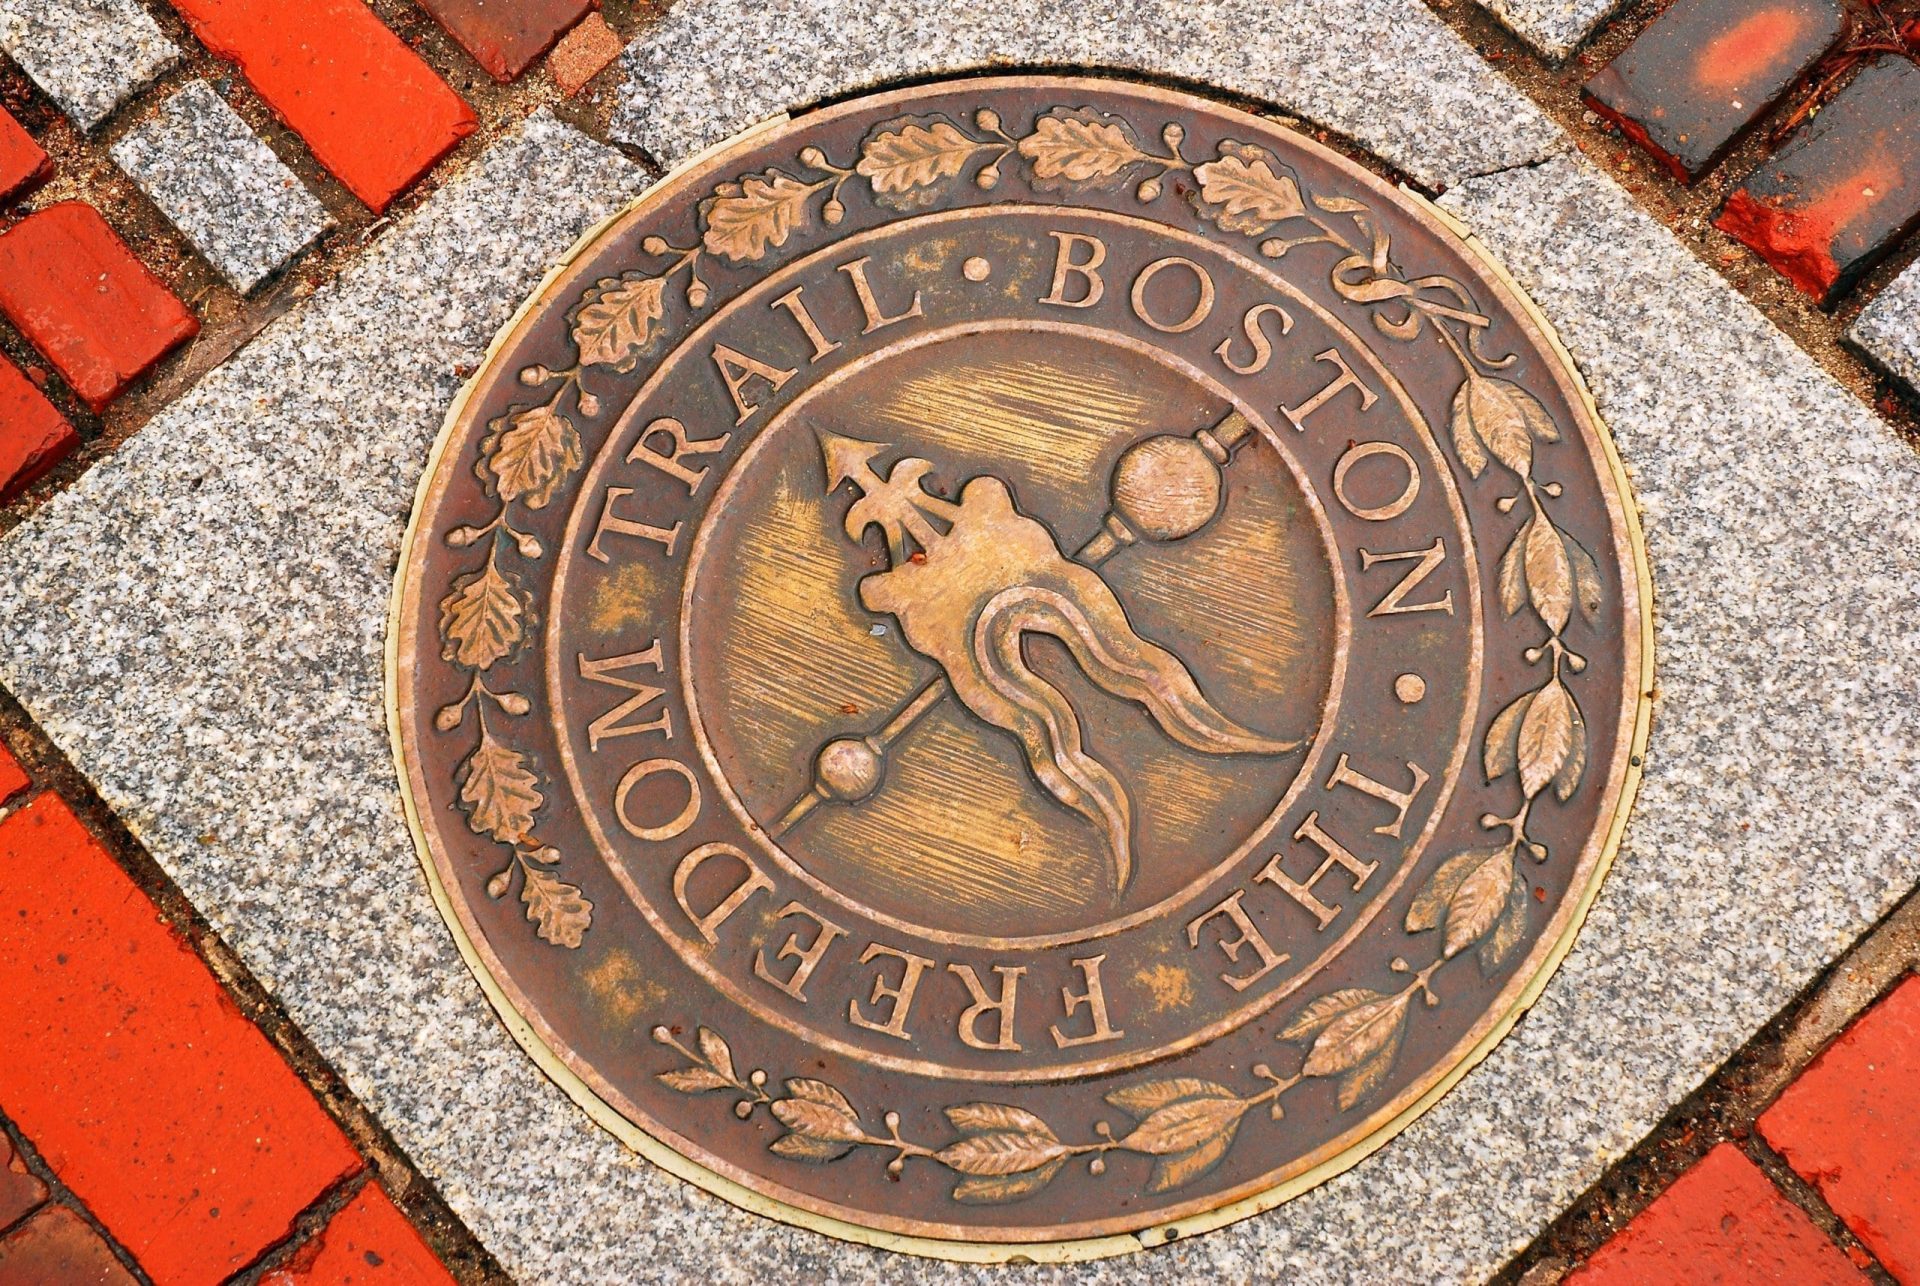 What can you see on the Freedom Trail?